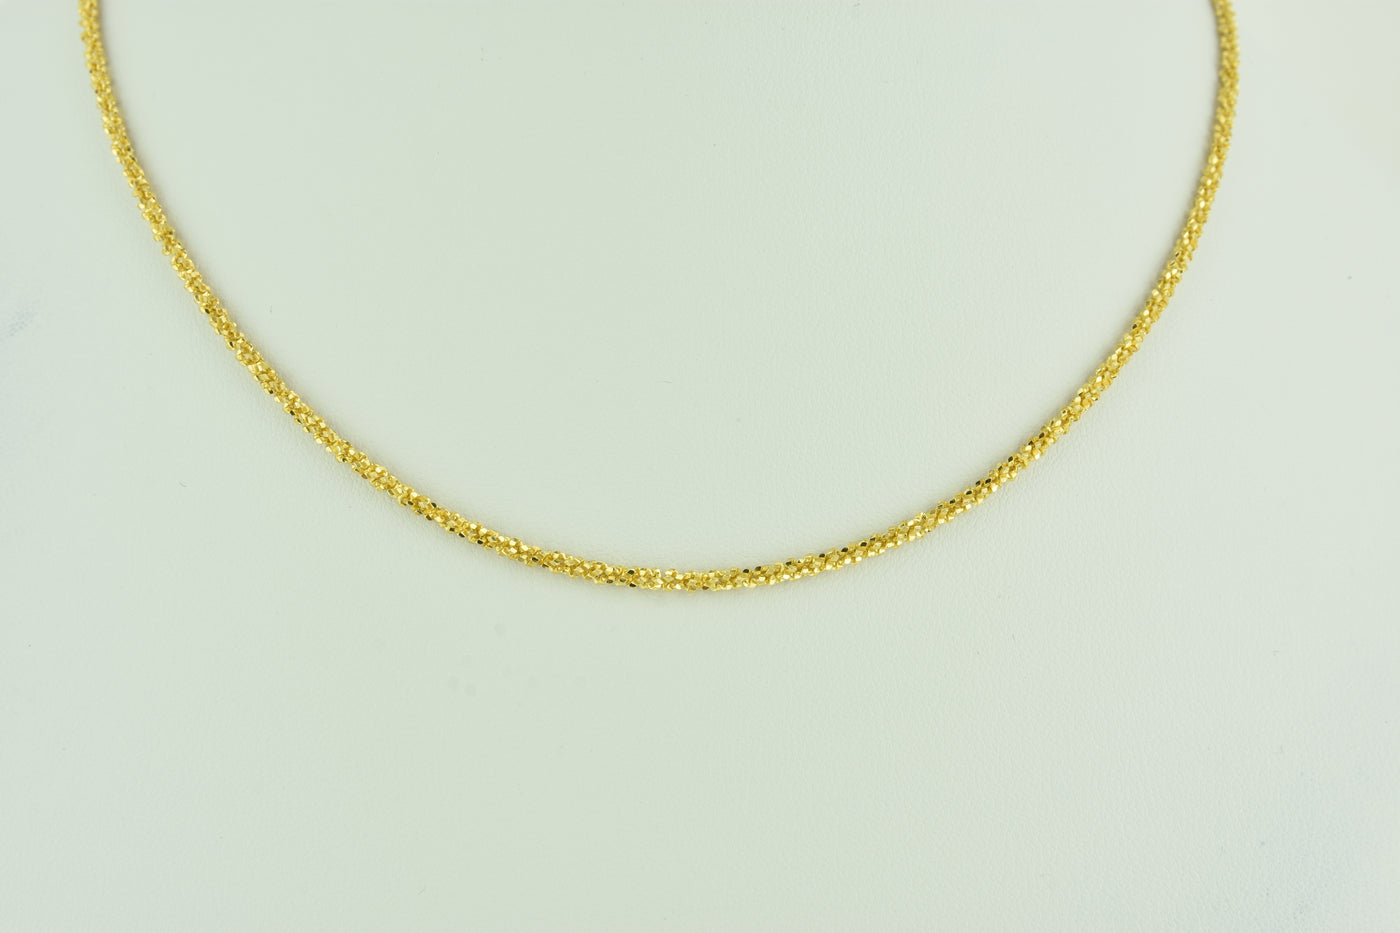 Diamond Cut Twisted Sterling Silver Chain with Yellow Gold Plate